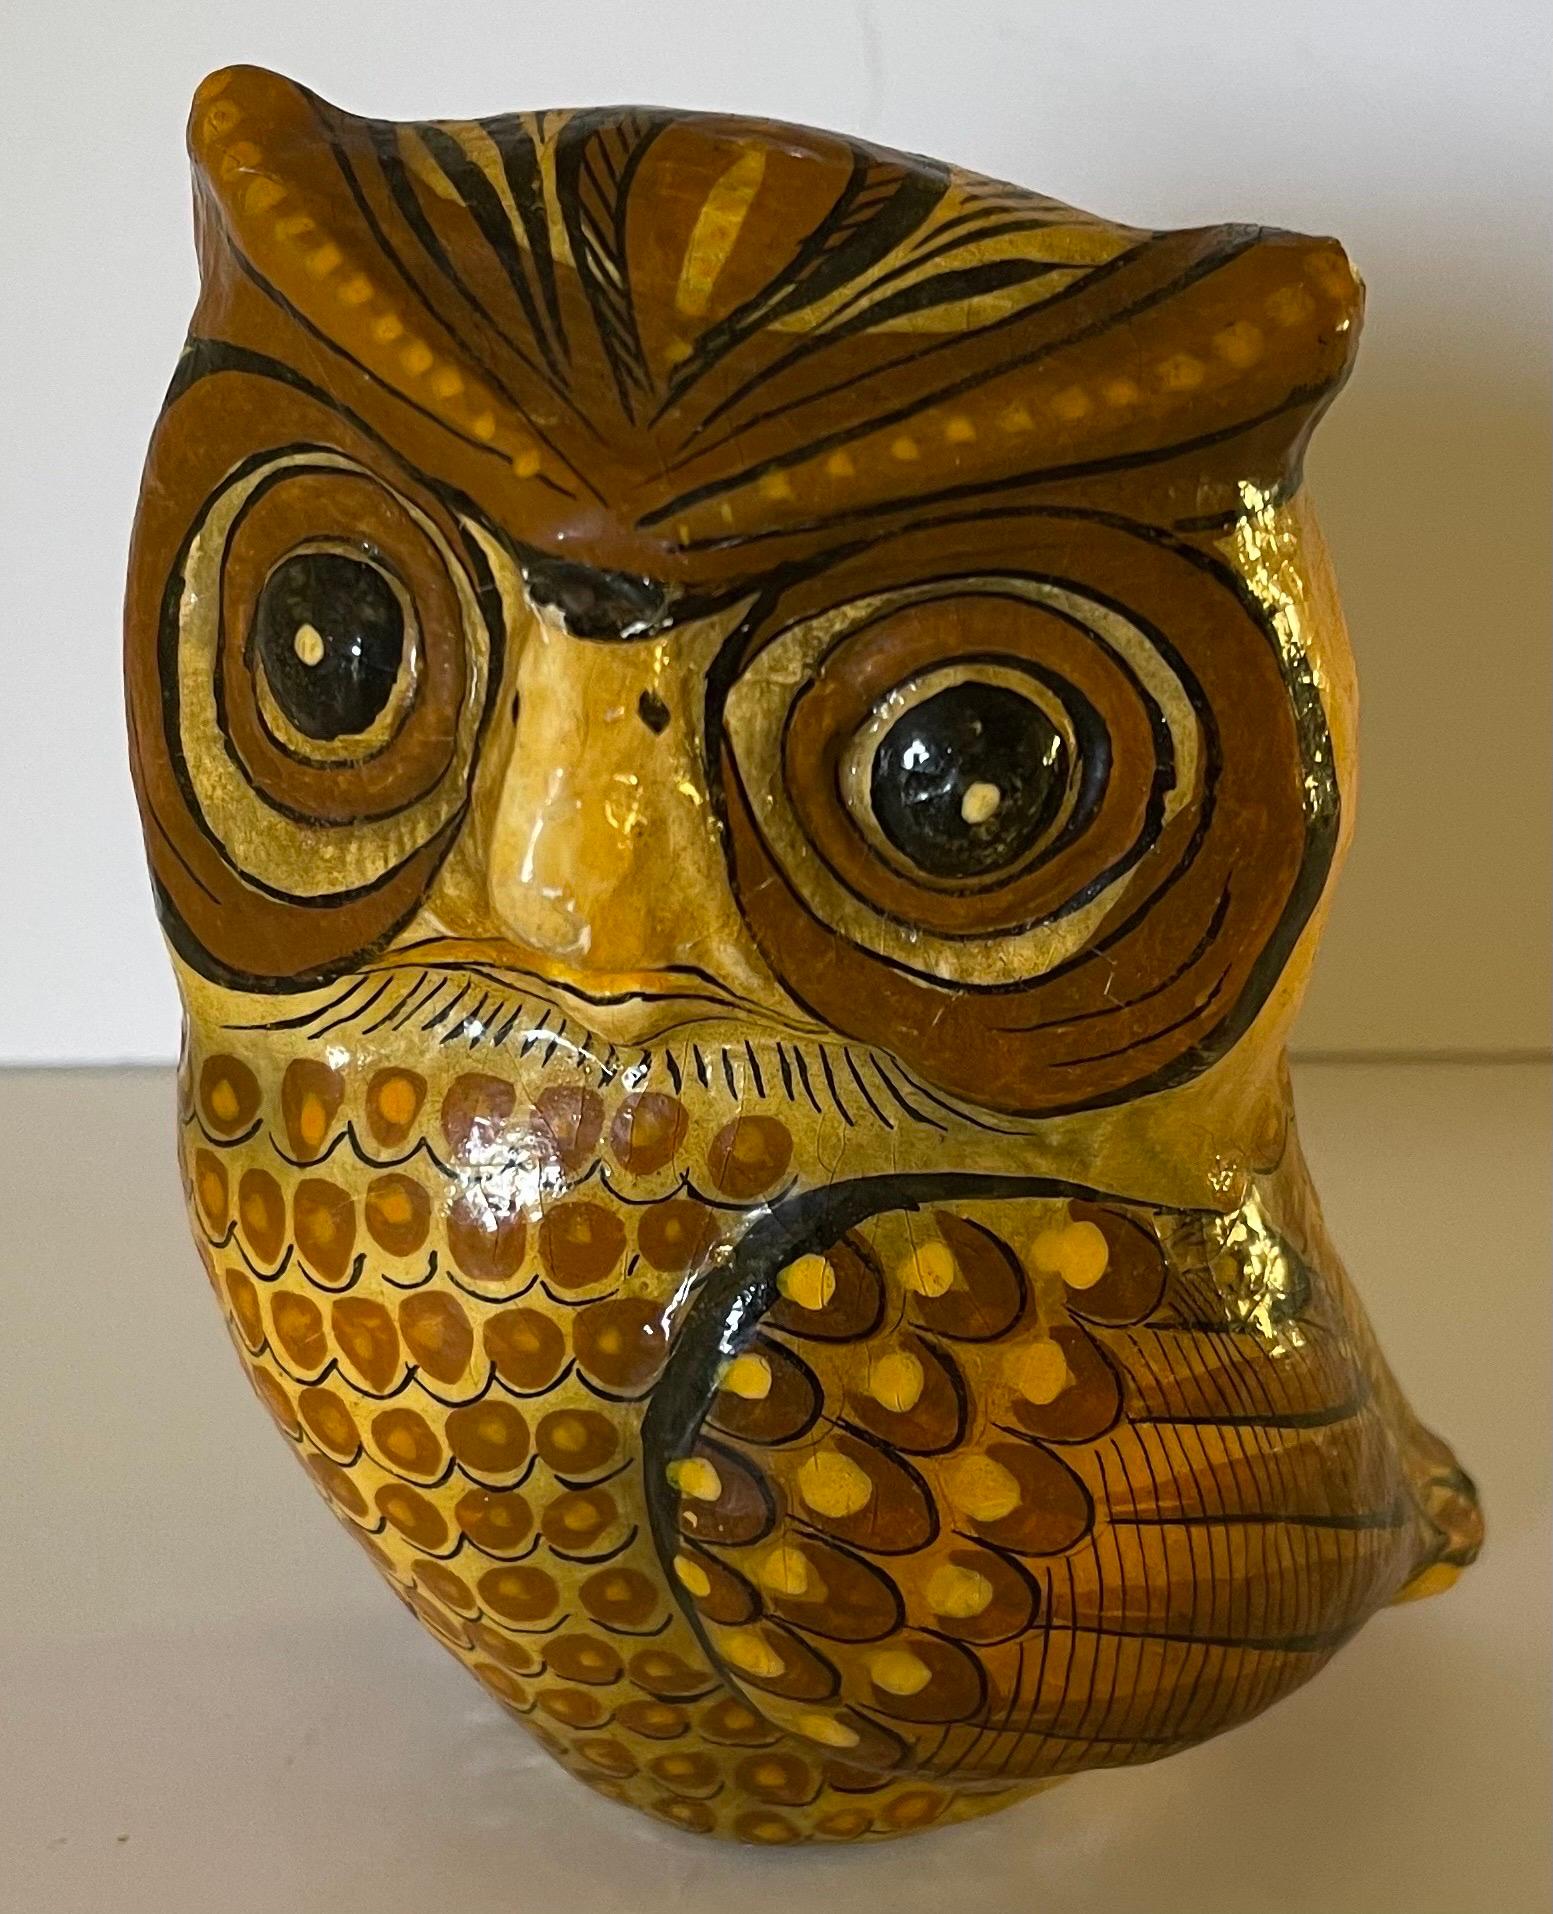 Papier mâché small owl by Sermel. Hand painted design with overall areas of wear and minimal paint loss. Signed on the underside.